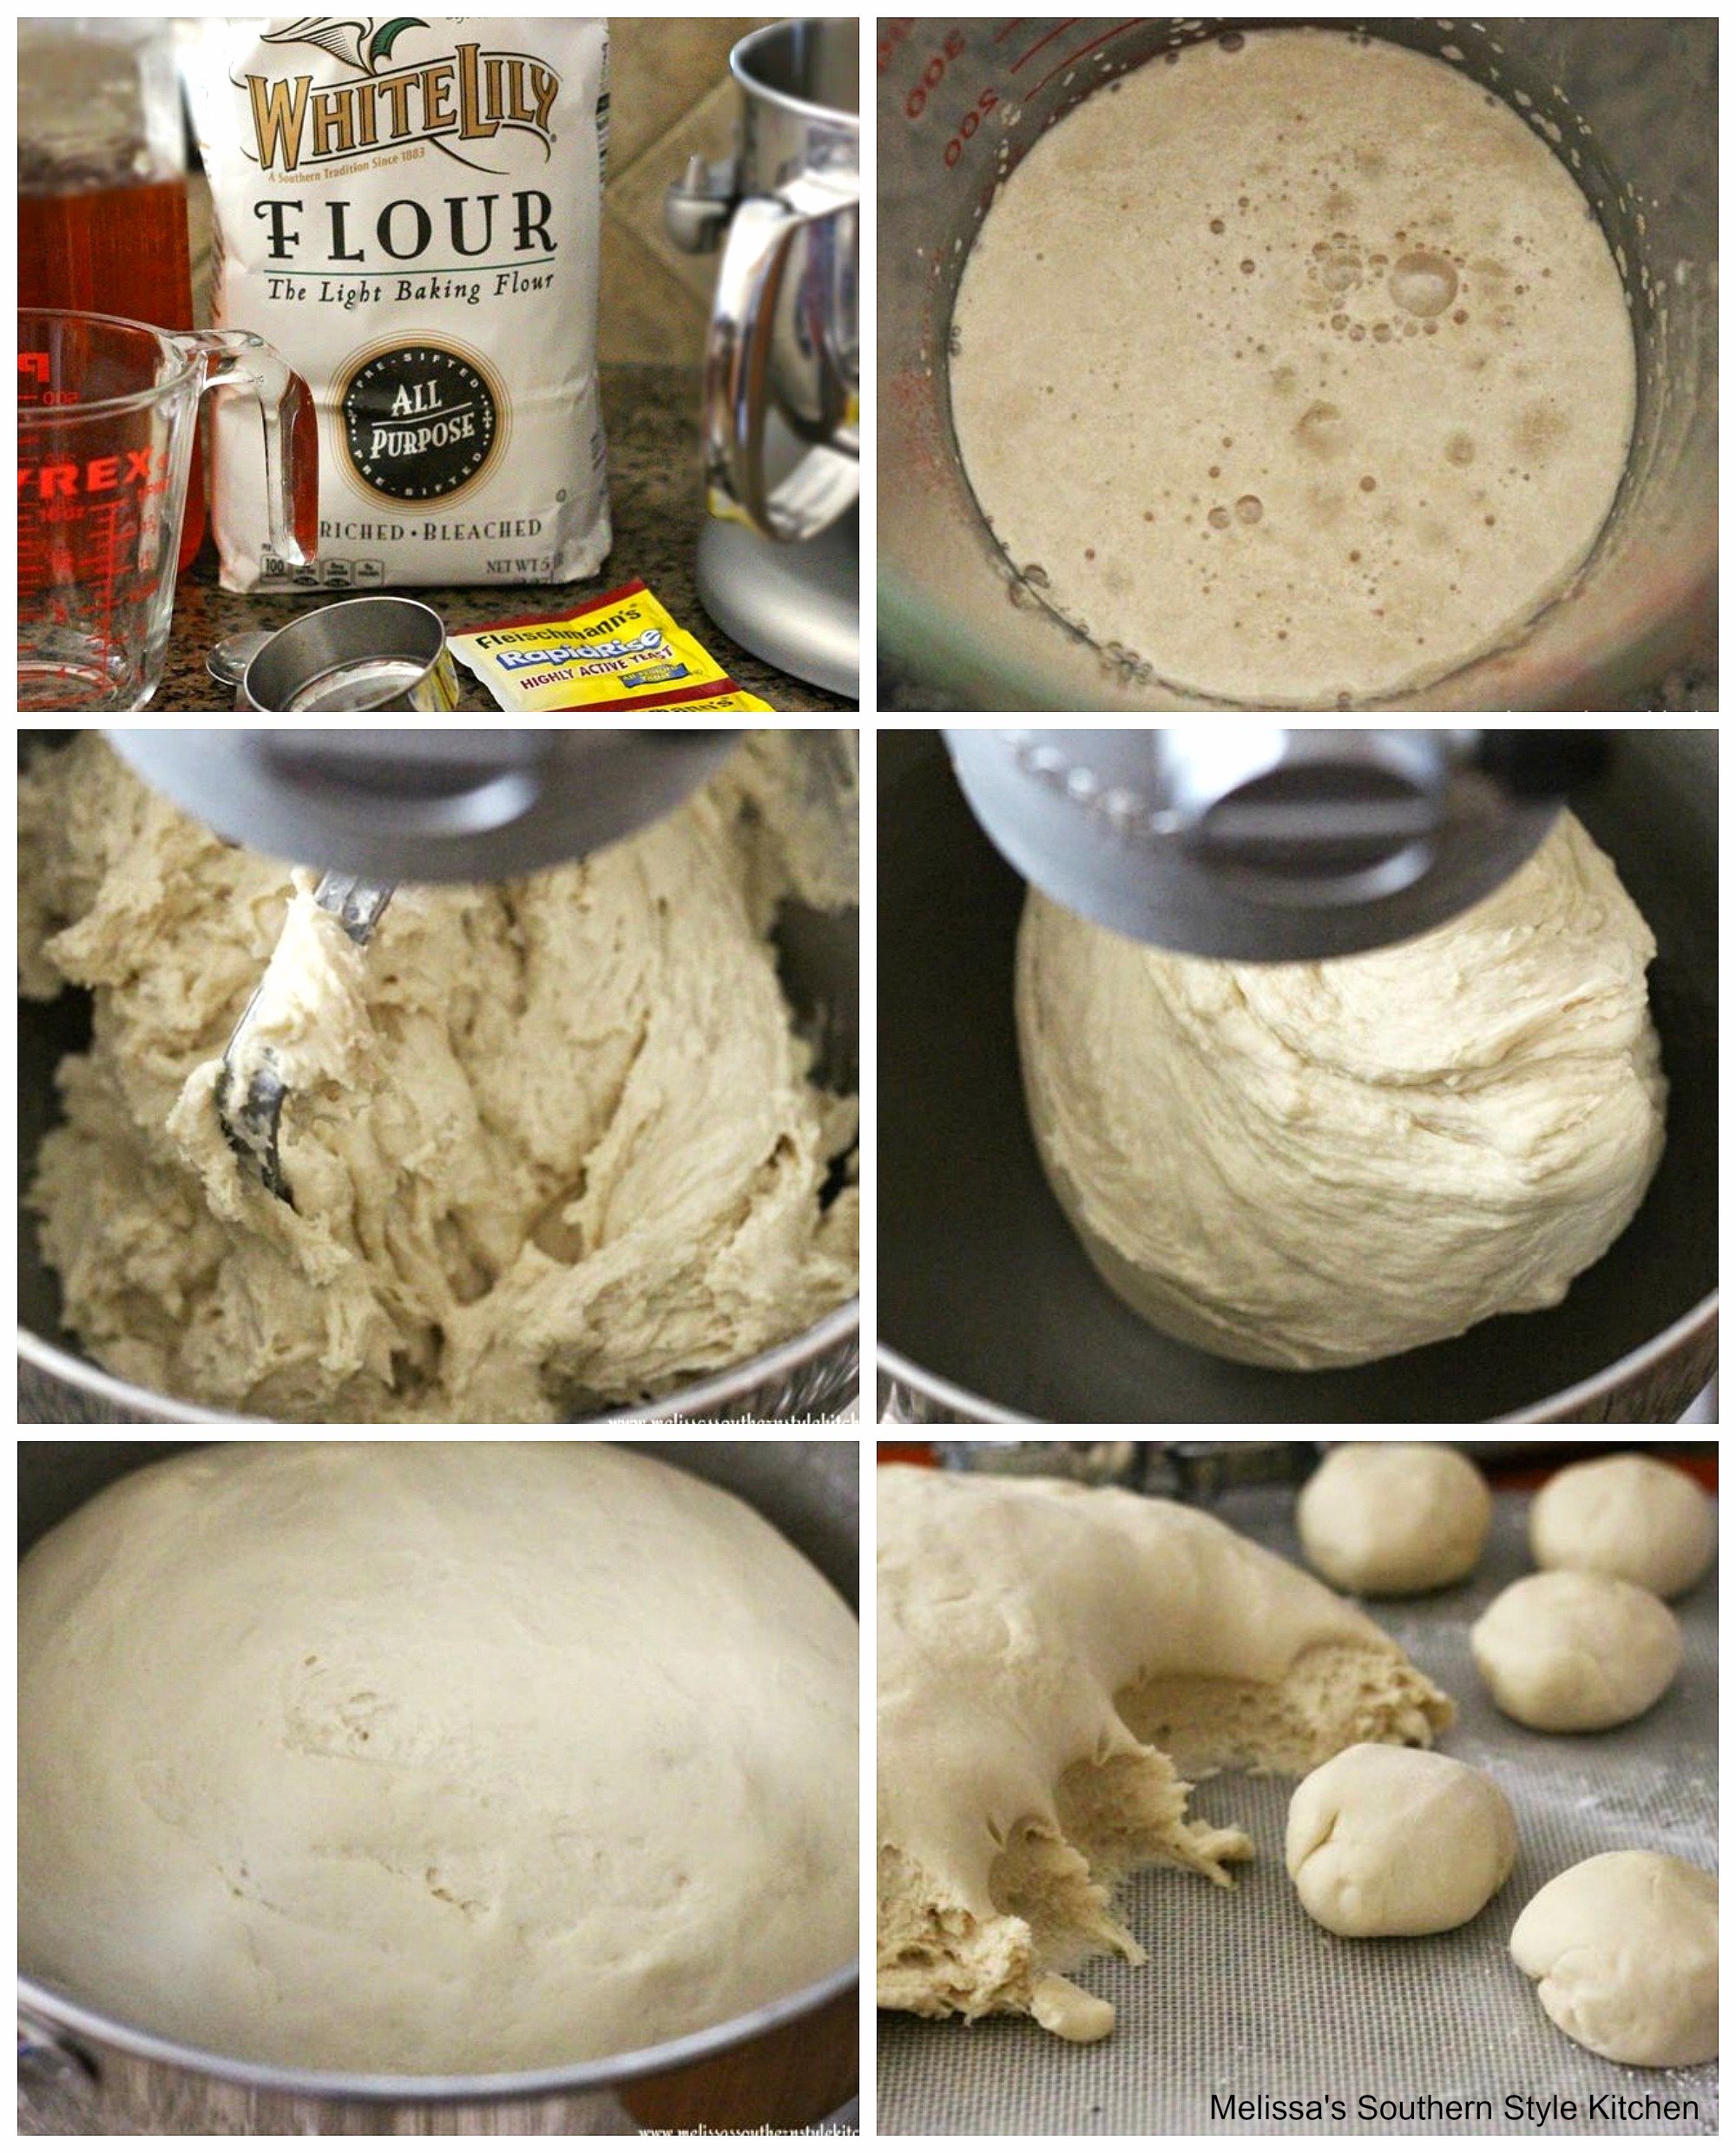 Step-by-step images of preparation of Honey Yeast Rolls